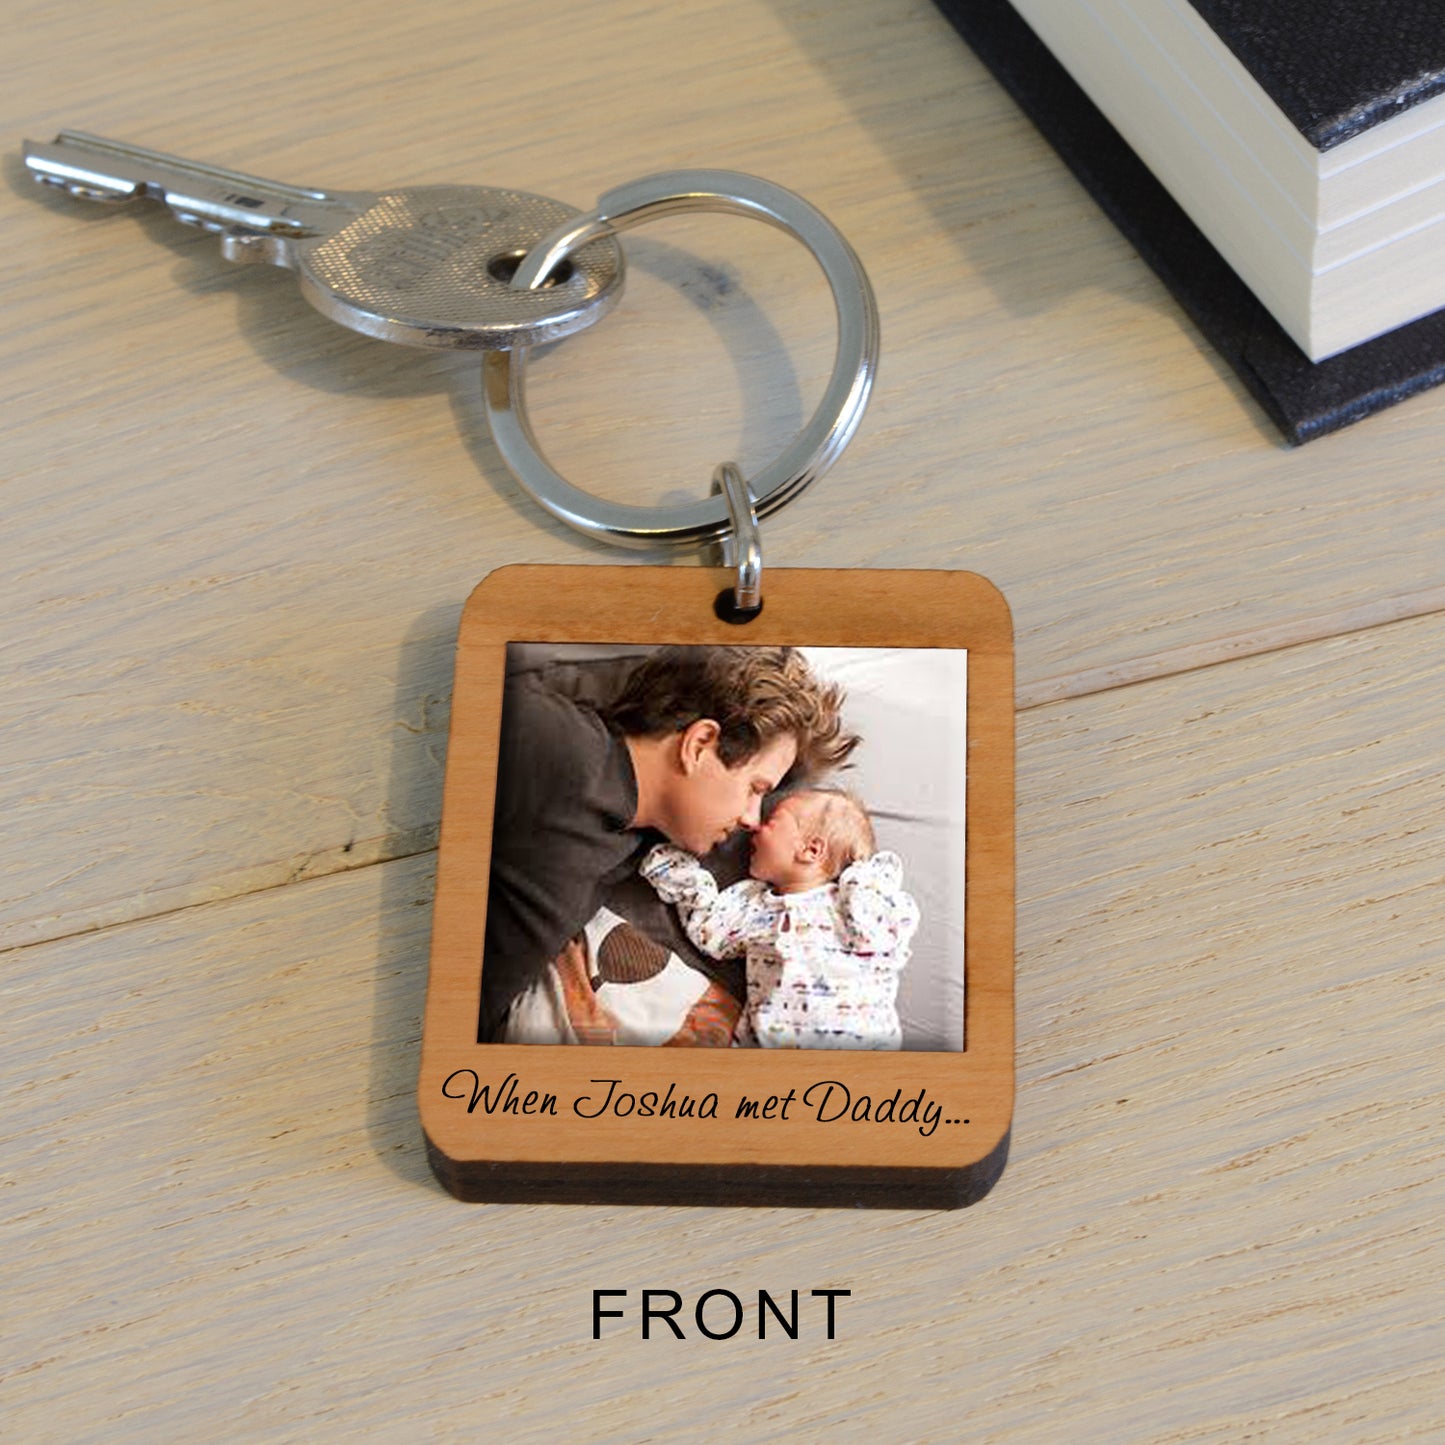 Engraved Personalised Wooden Key Ring with Name and Photo, Met Daddy Keepsake Gift